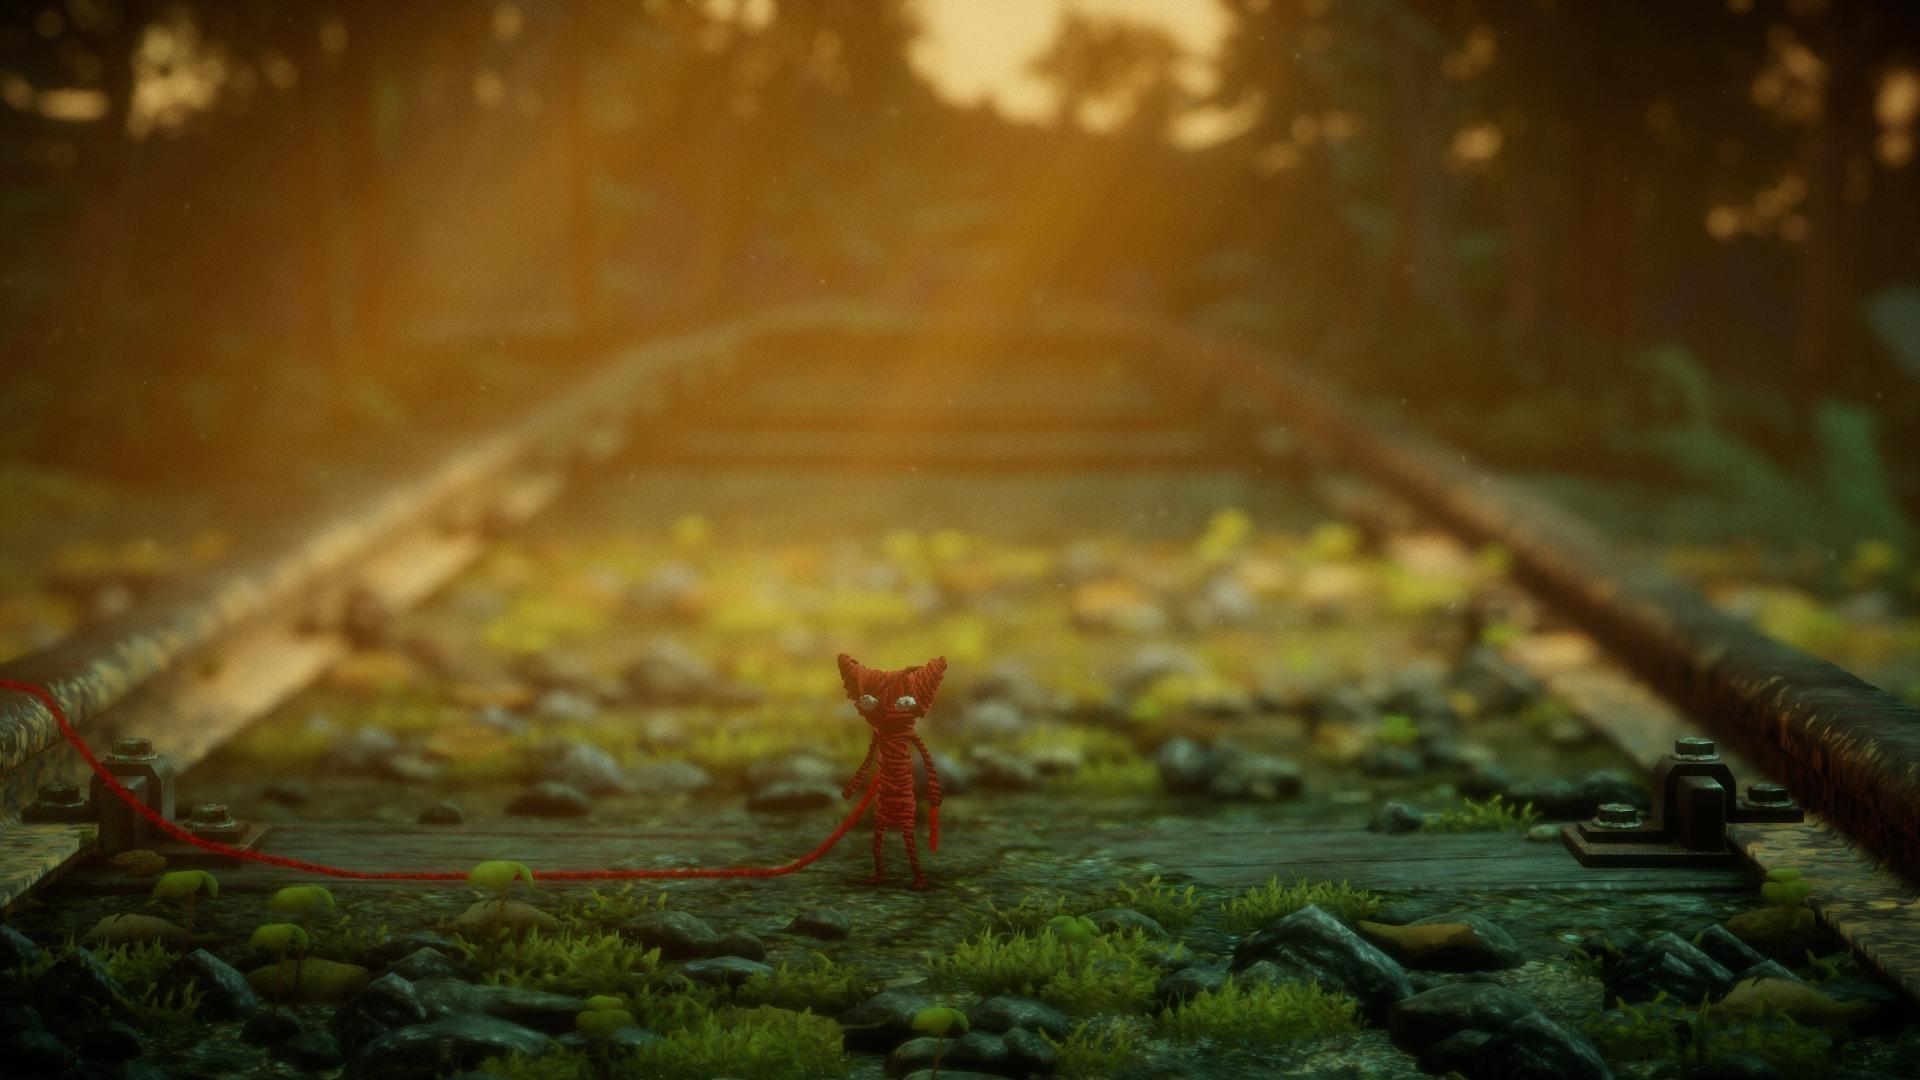 Unravel is an impressive and beautiful game. Here are some